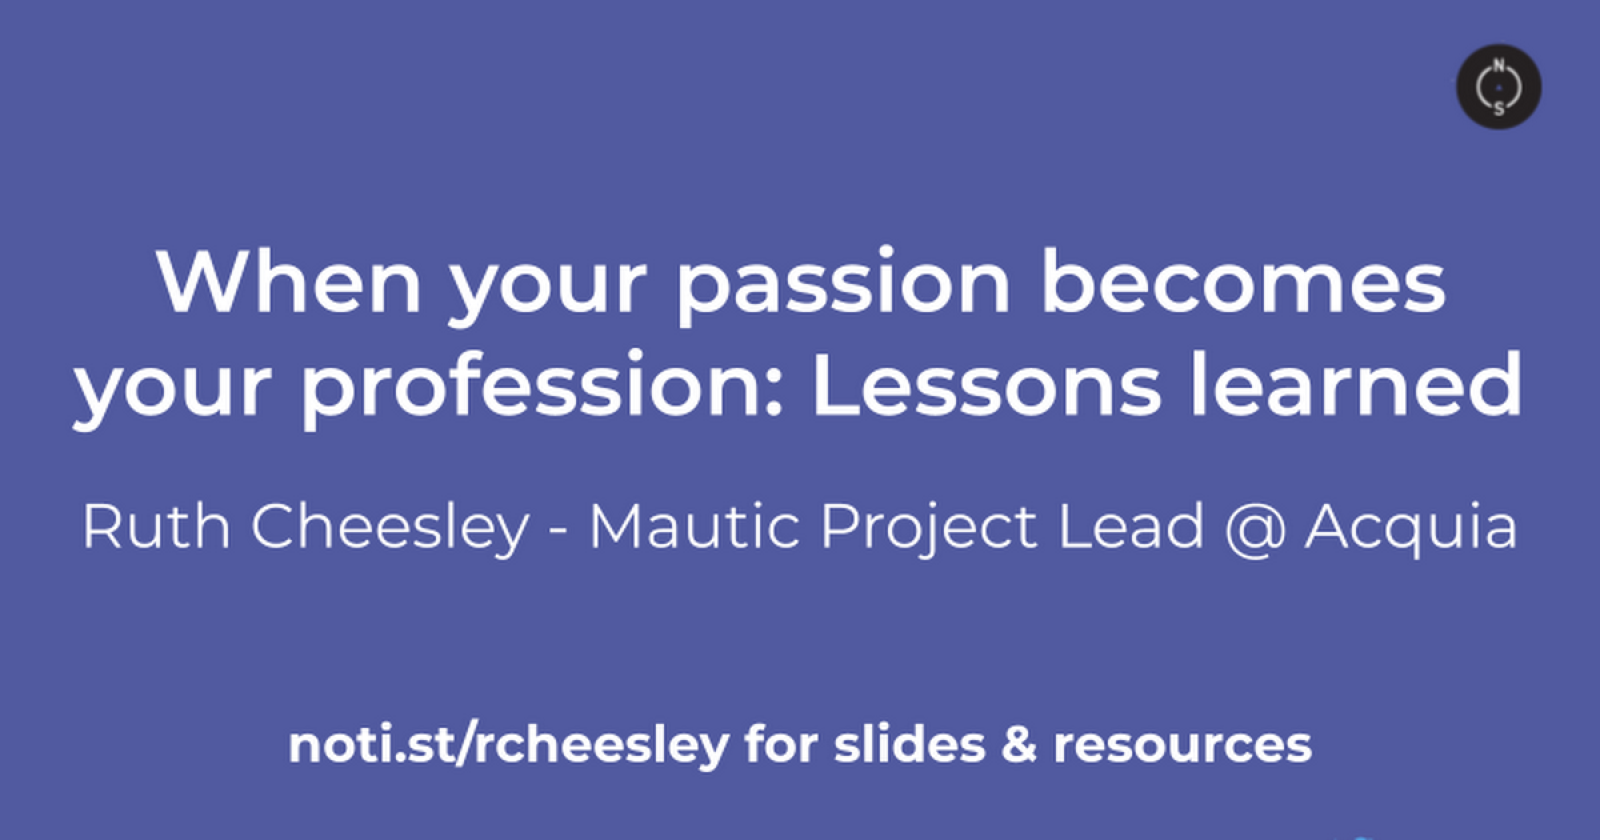 When your passion becomes your profession: Lessons learned